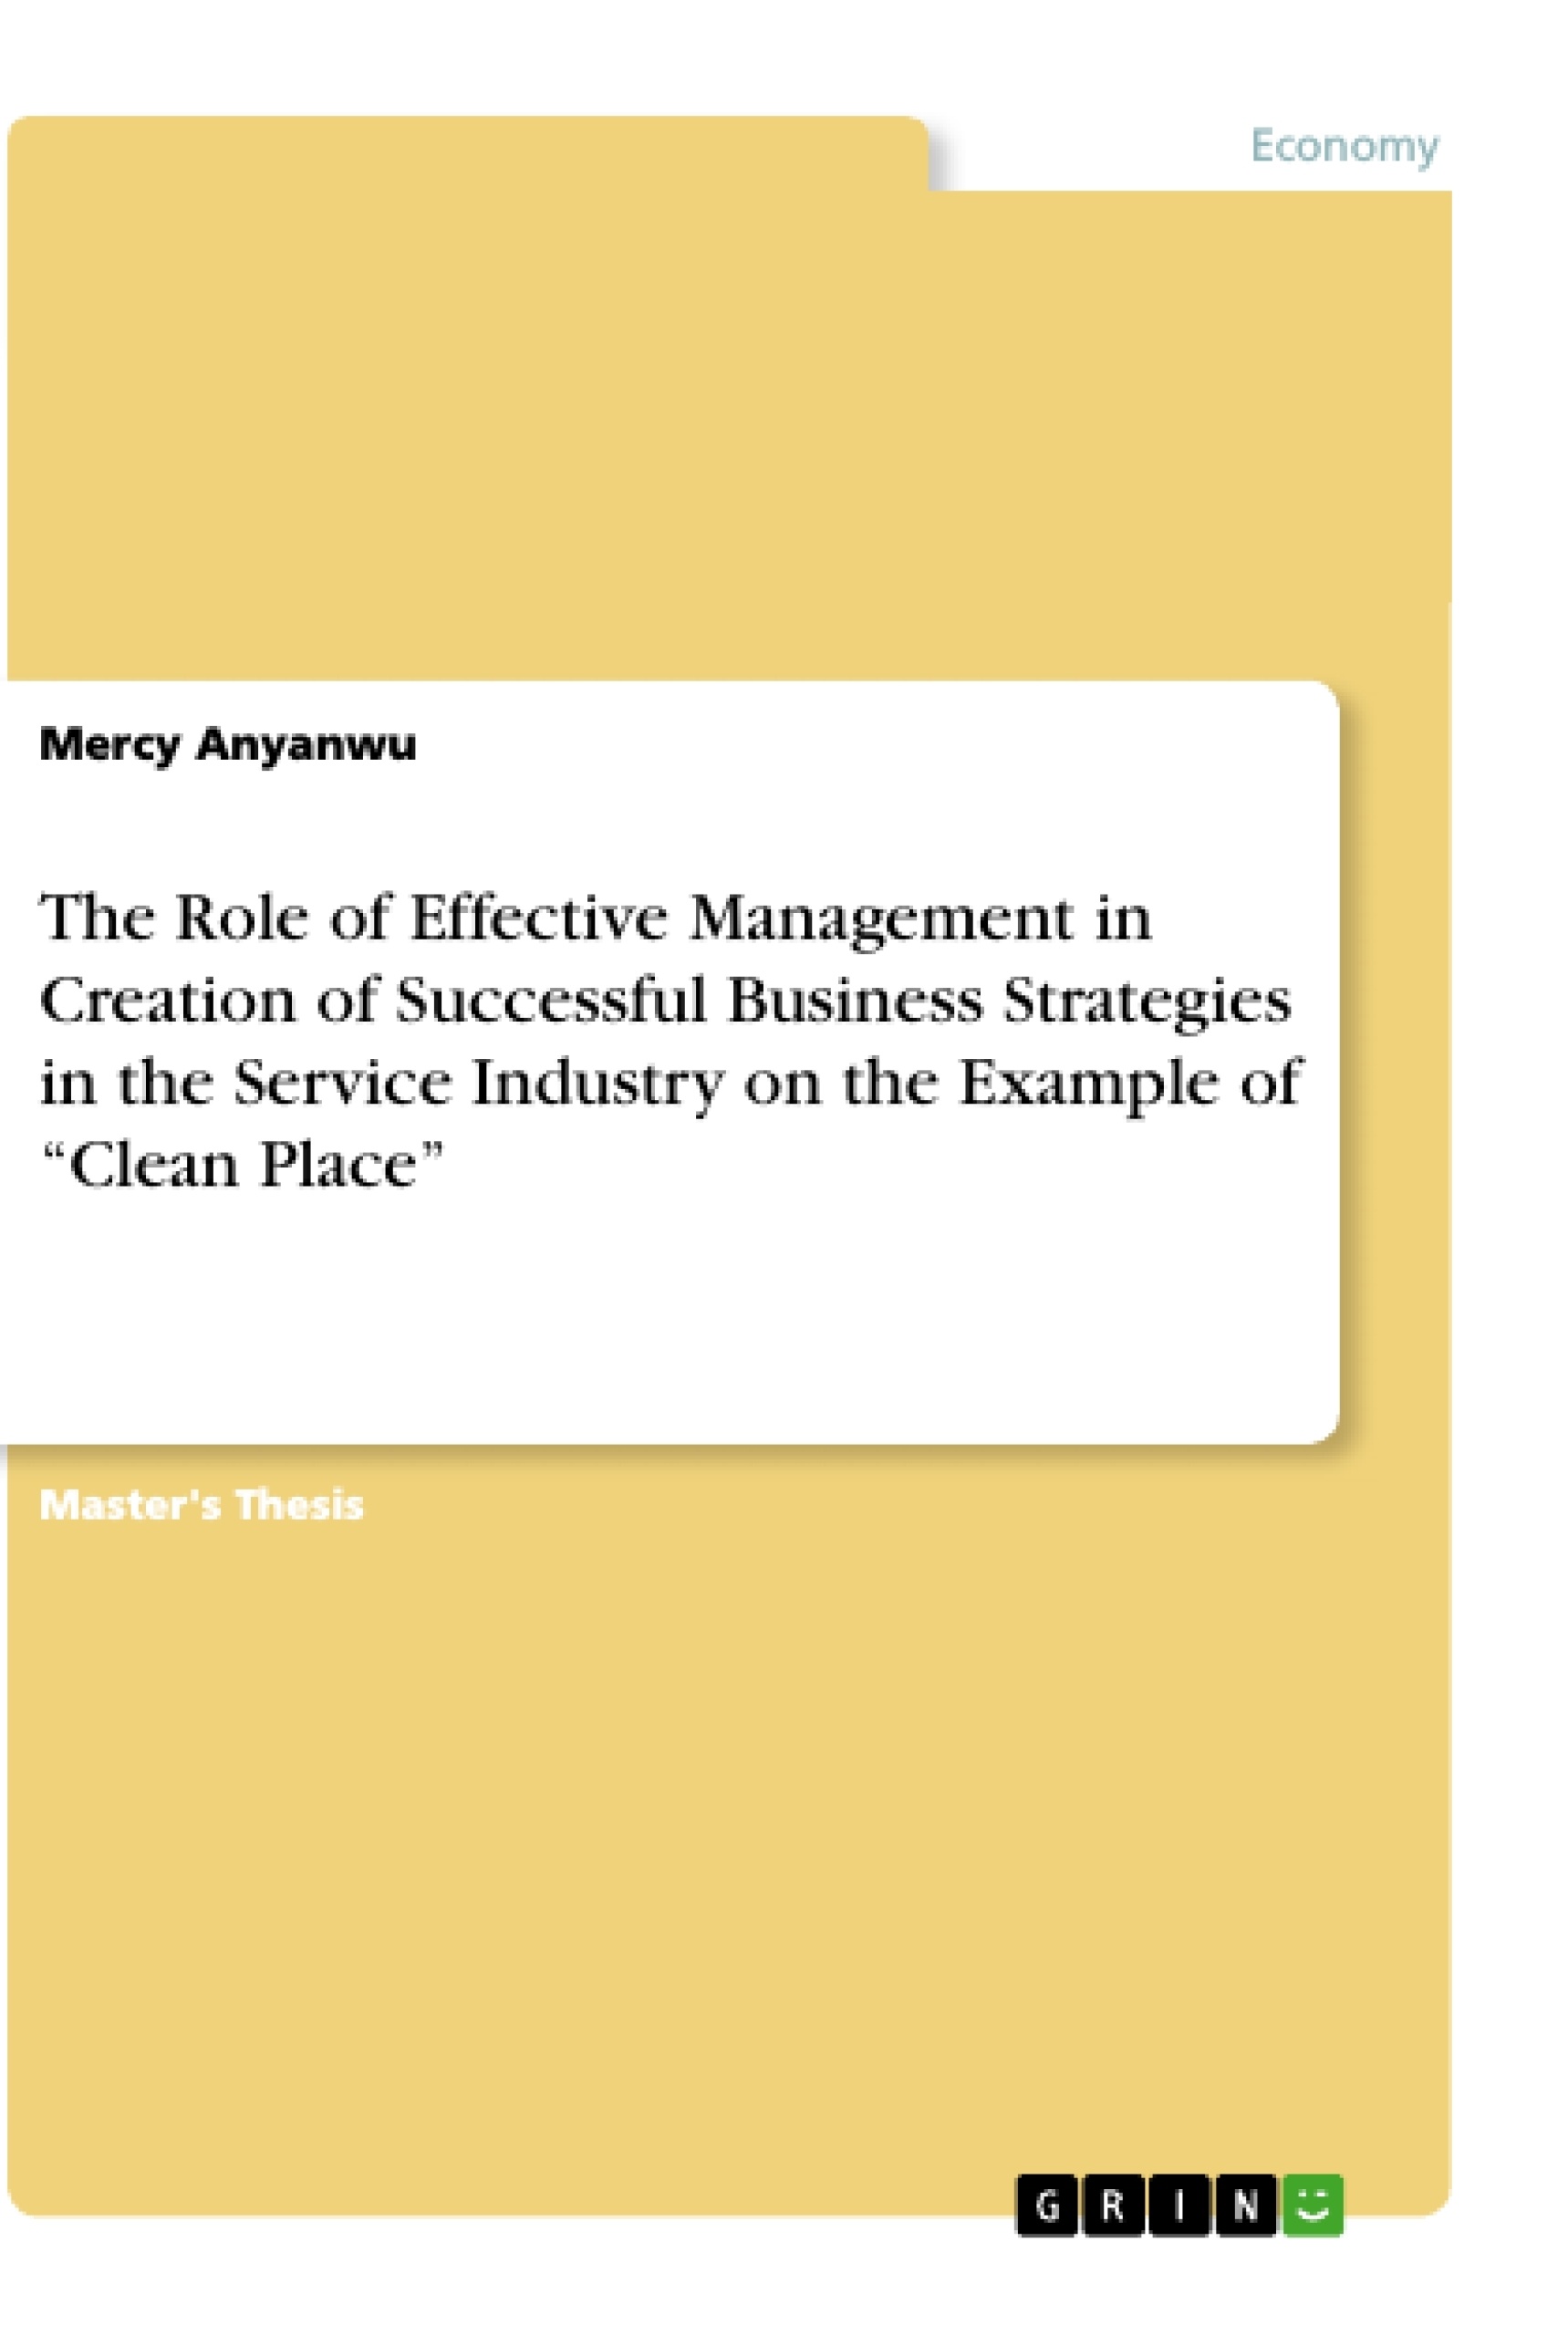 Title: The Role of Effective Management in Creation of Successful Business Strategies in the Service Industry on the Example of “Clean Place”